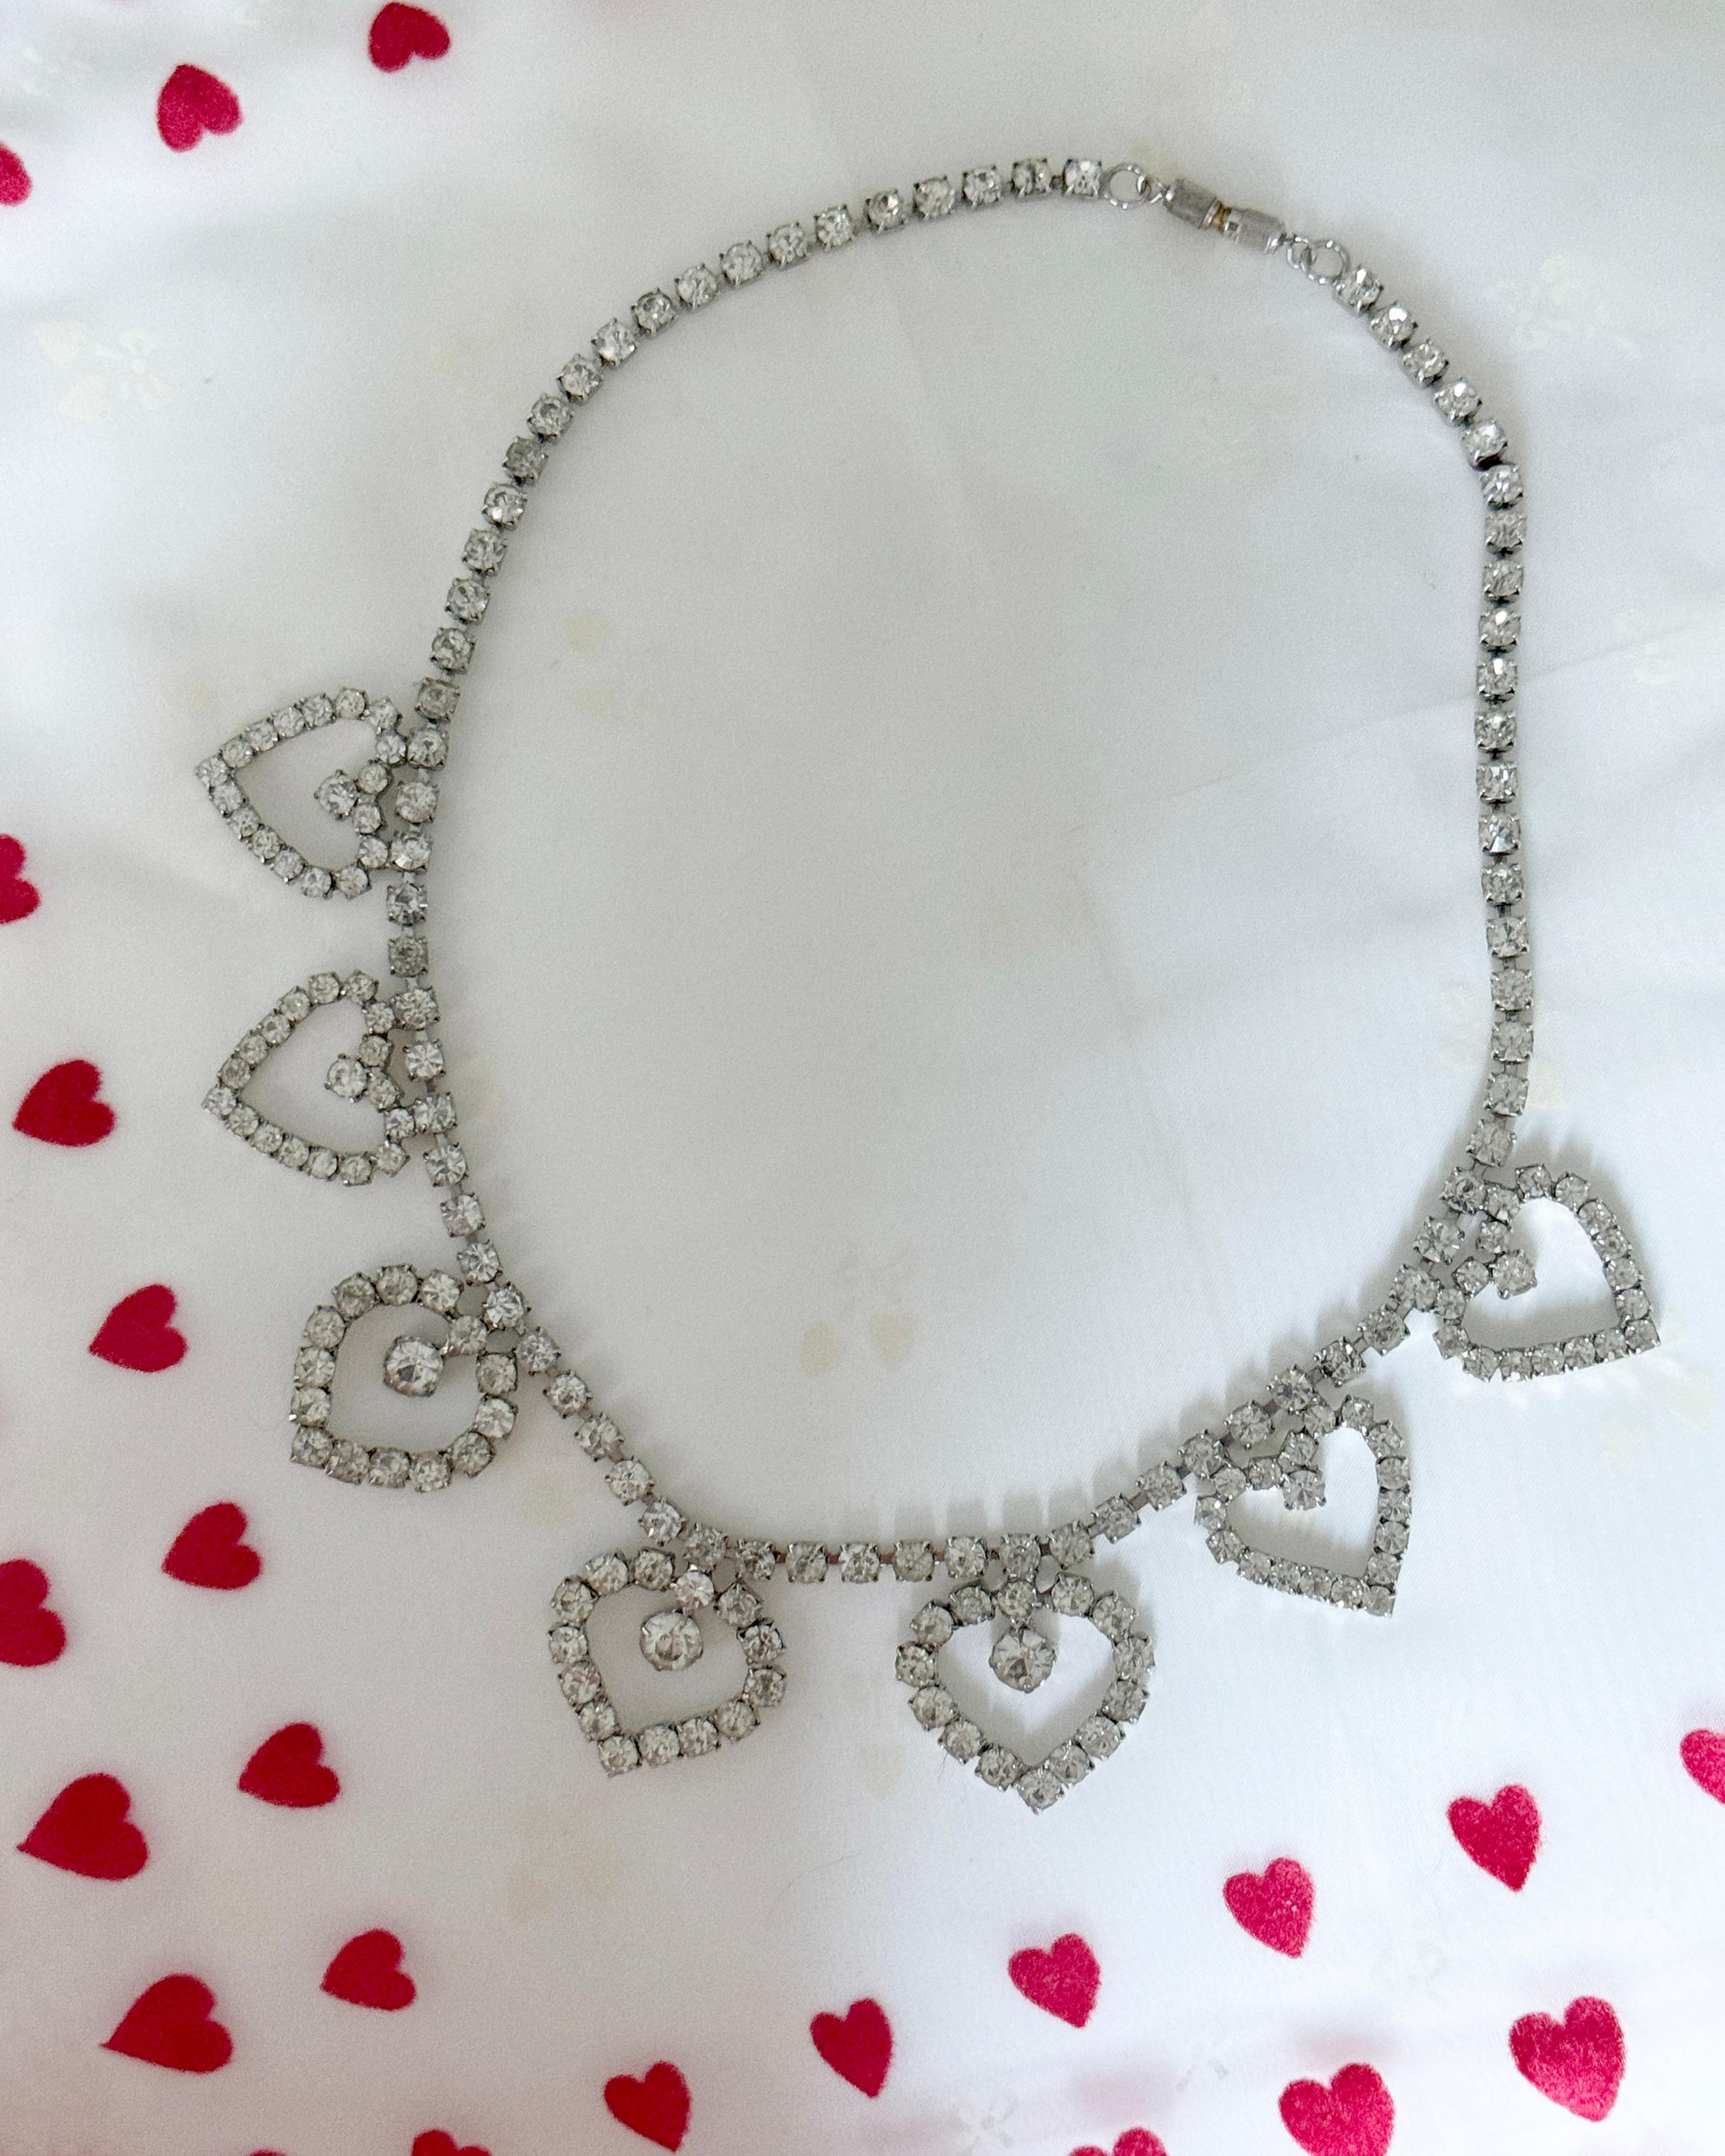 VINTAGE 1950s DIAMANTÉ HEART STATEMENT NECKLACE In Good Condition For Sale In New York, NY